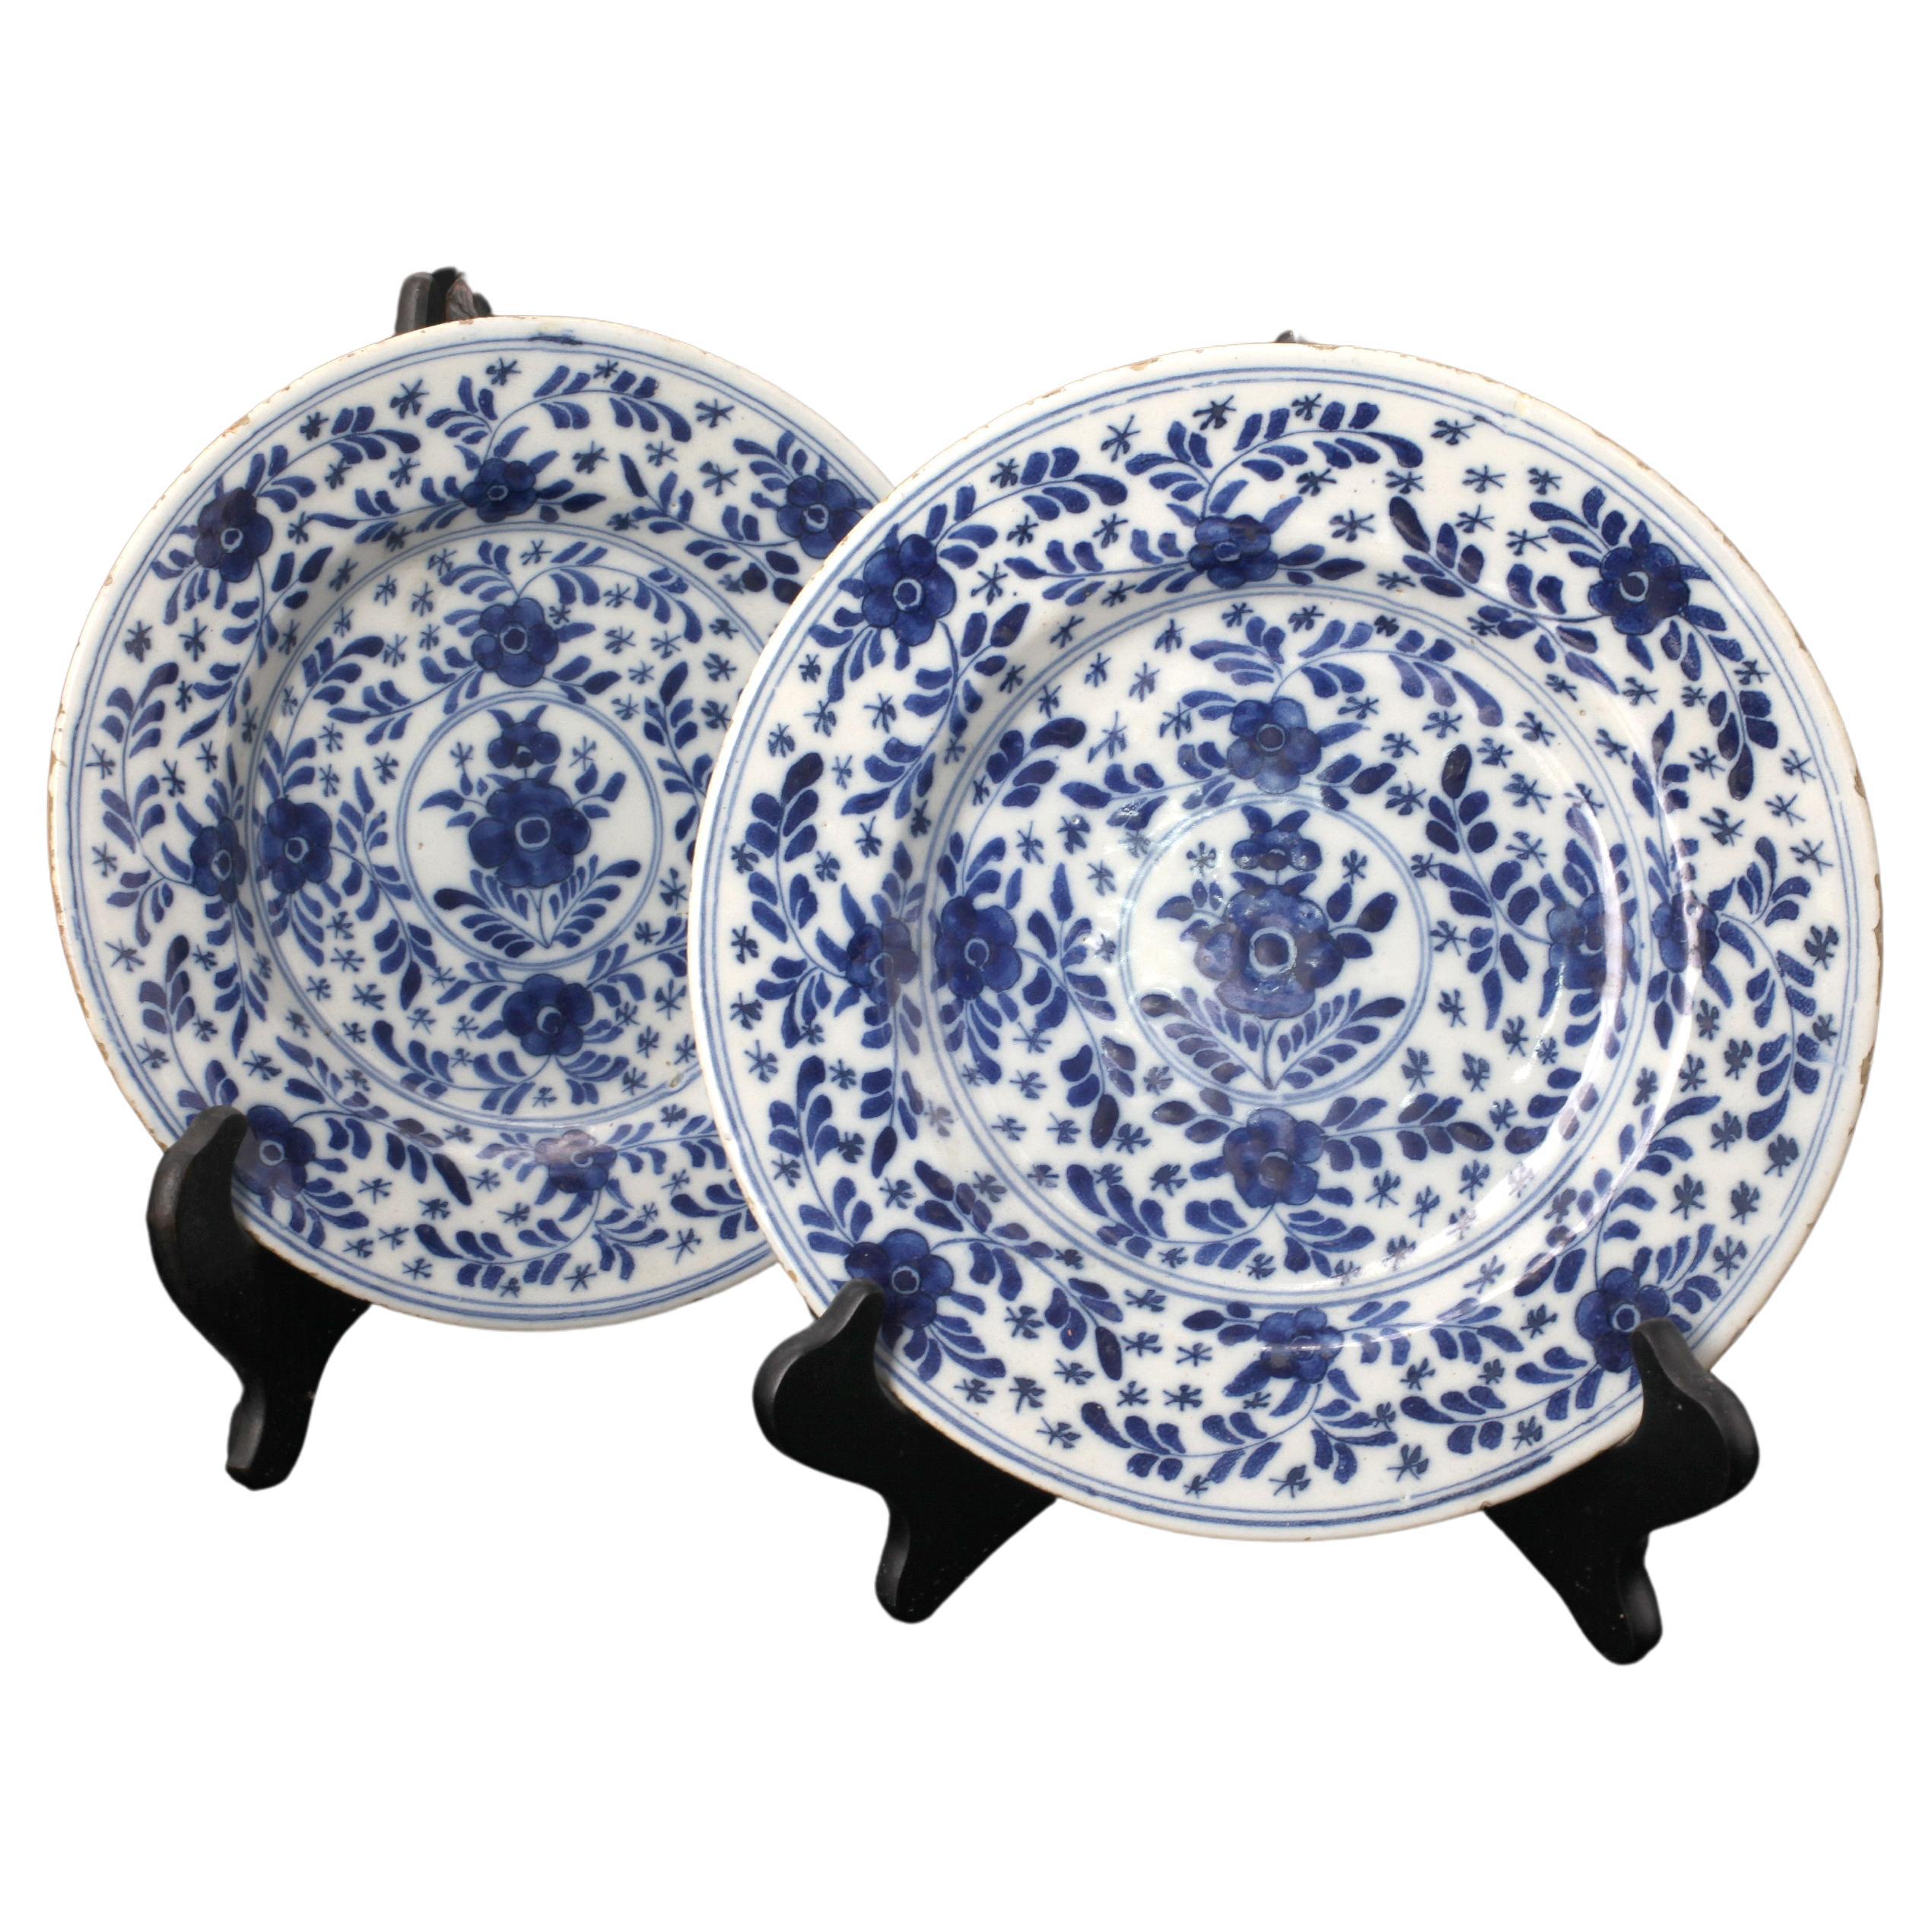 Pair Delft Blue & White Faience Plates, Late 18th C For Sale